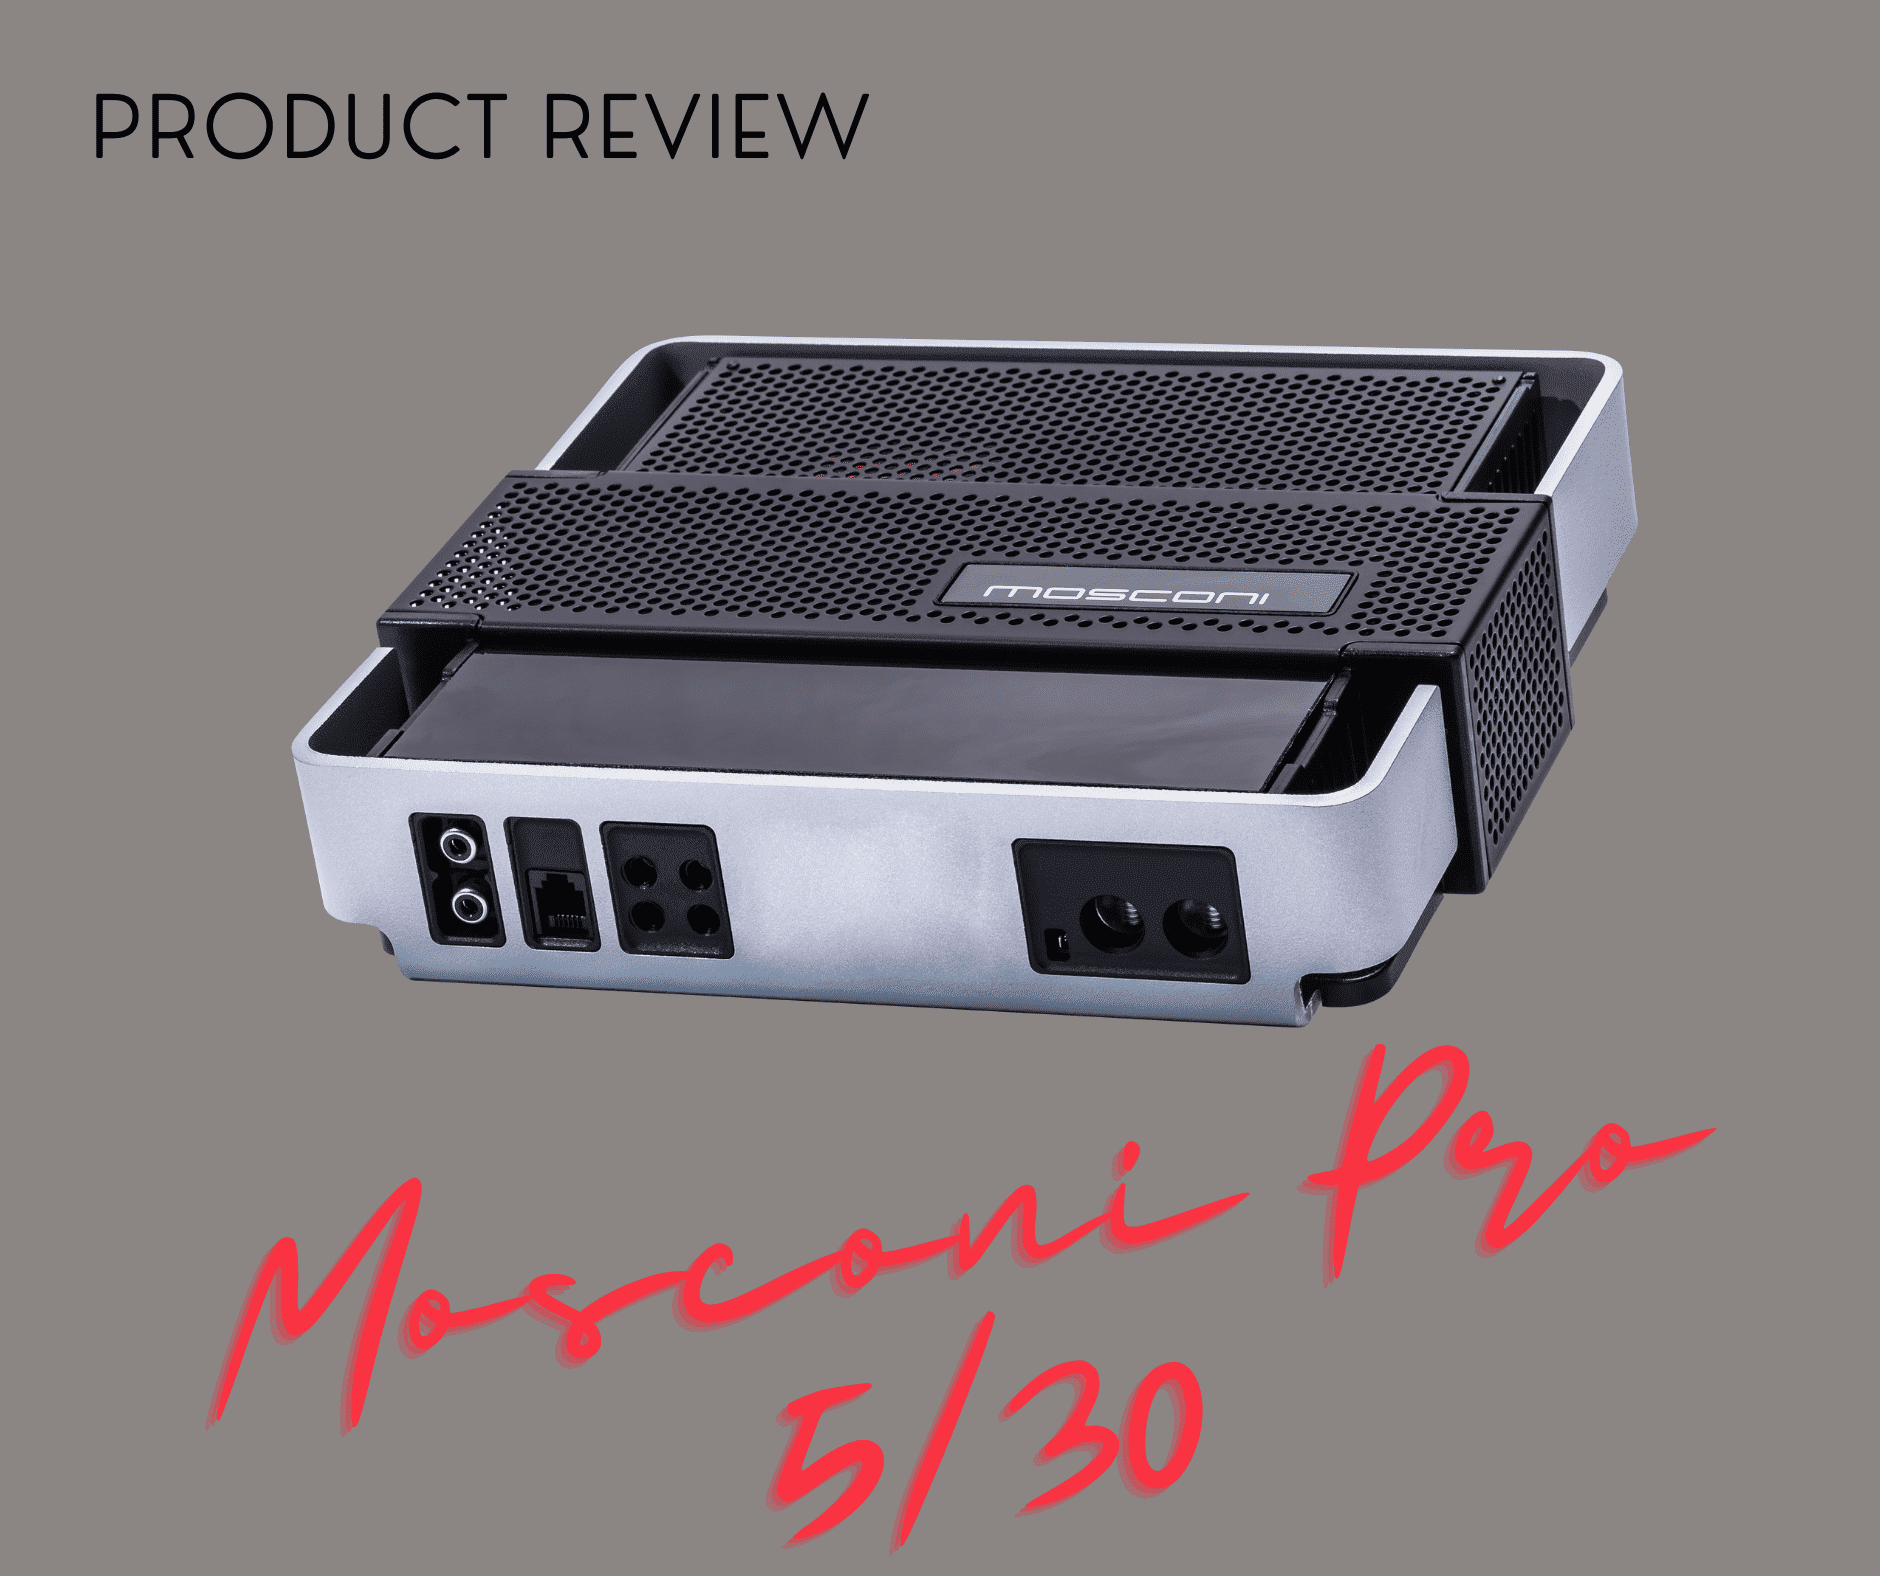 Mosconi Pro 530 review